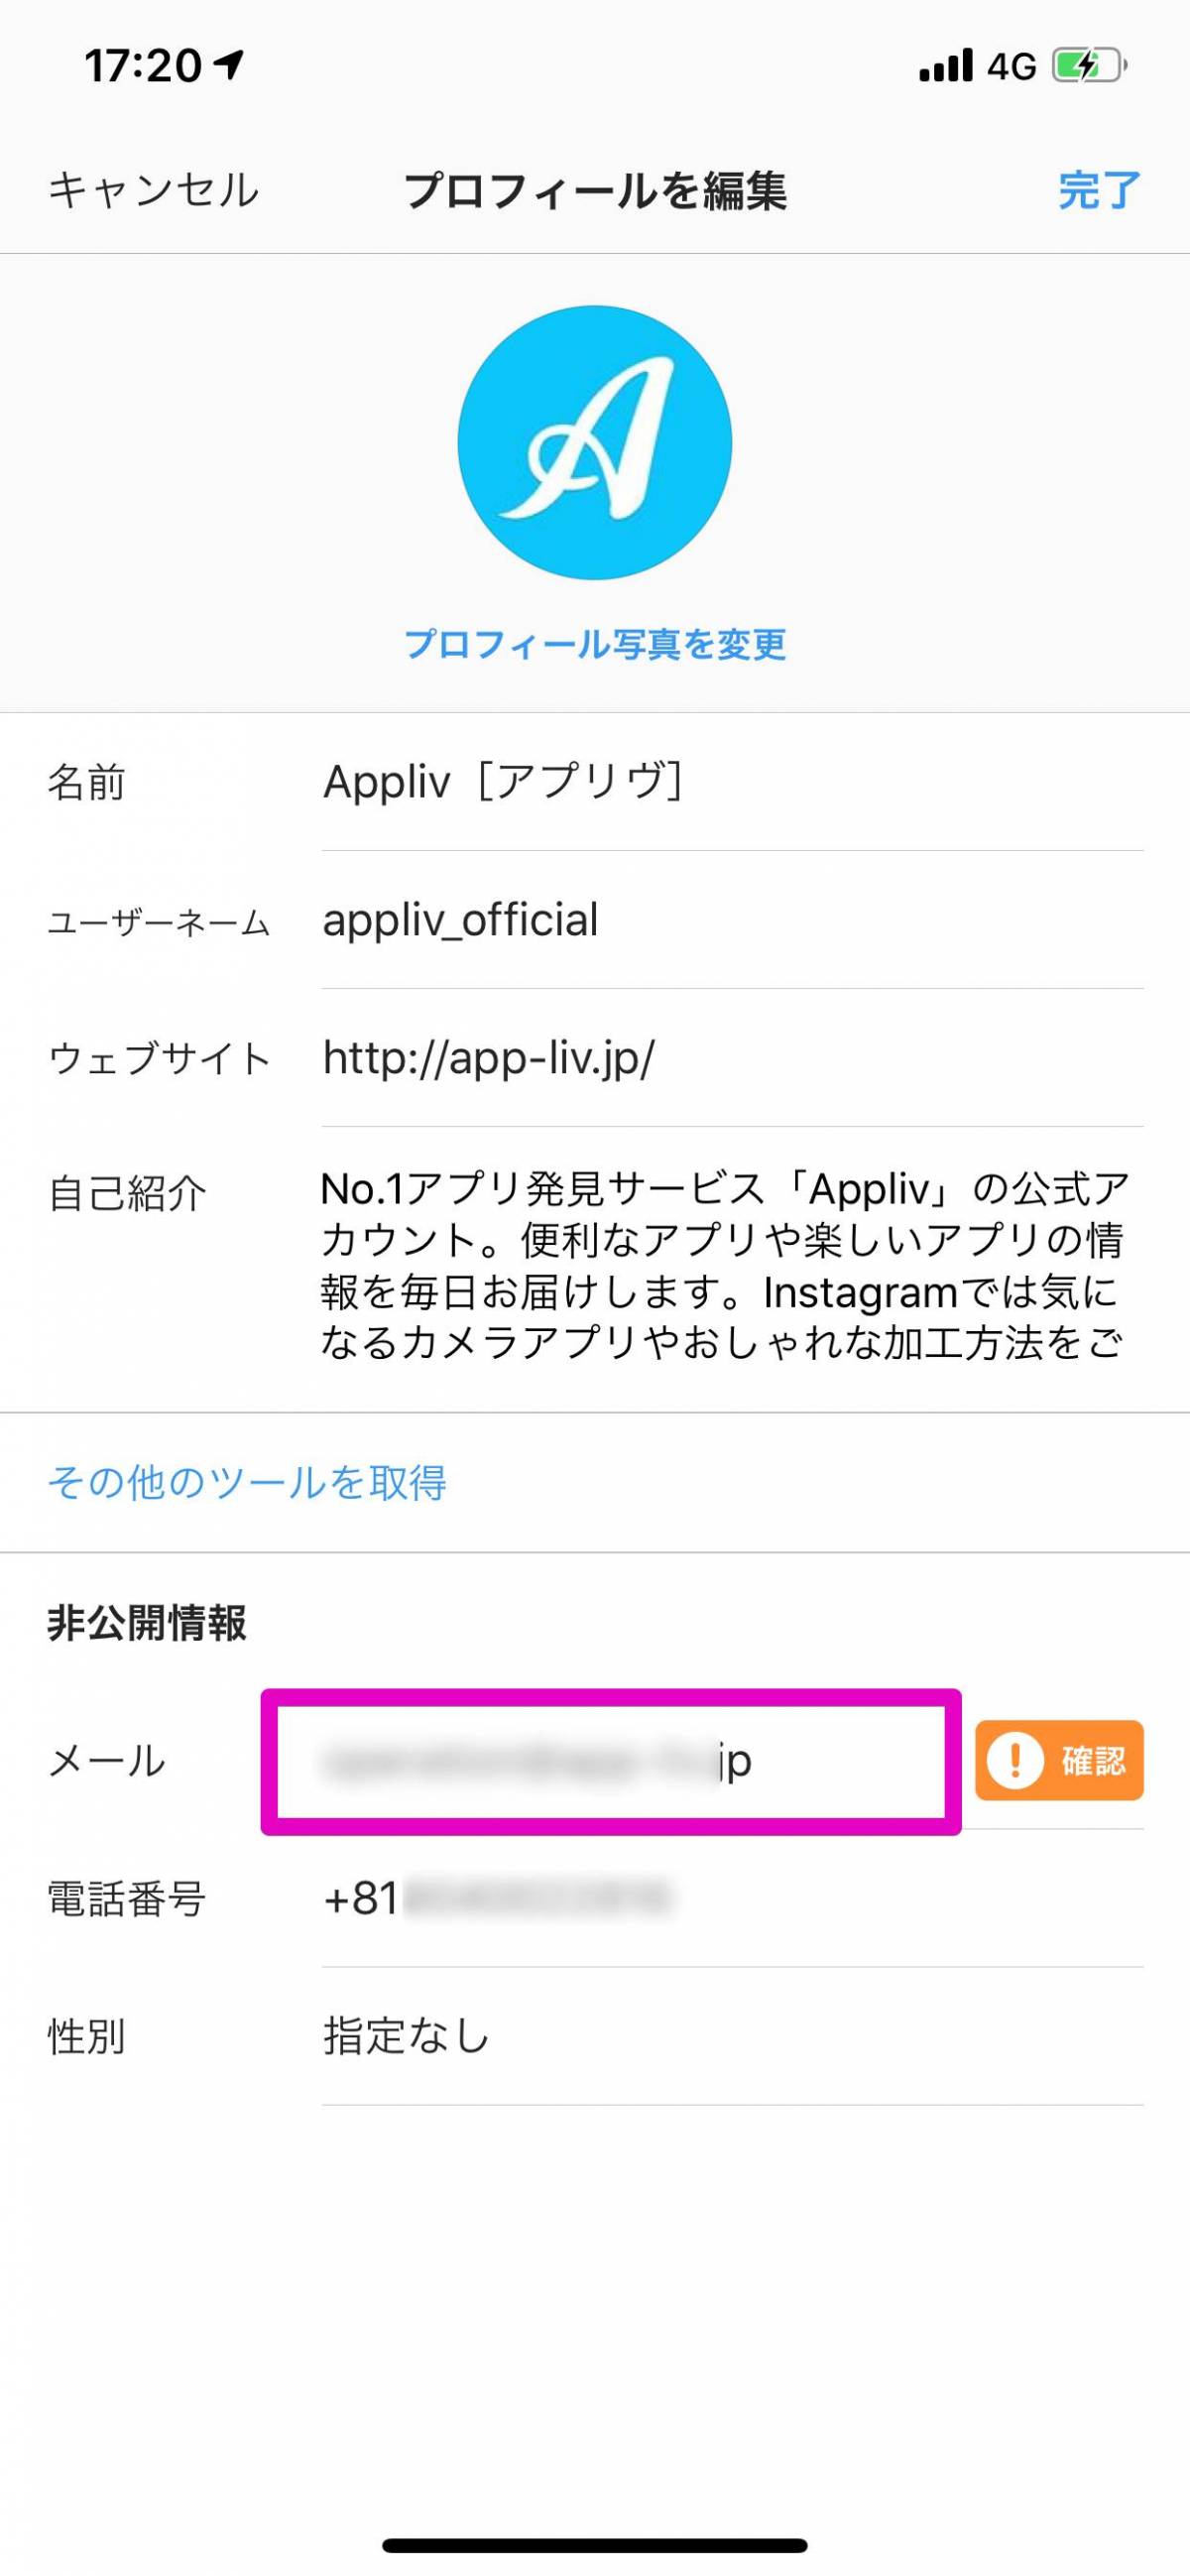 Instagram 登録メールアドレス 電話番号の確認 変更方法 Iphone Android Appliv Topics